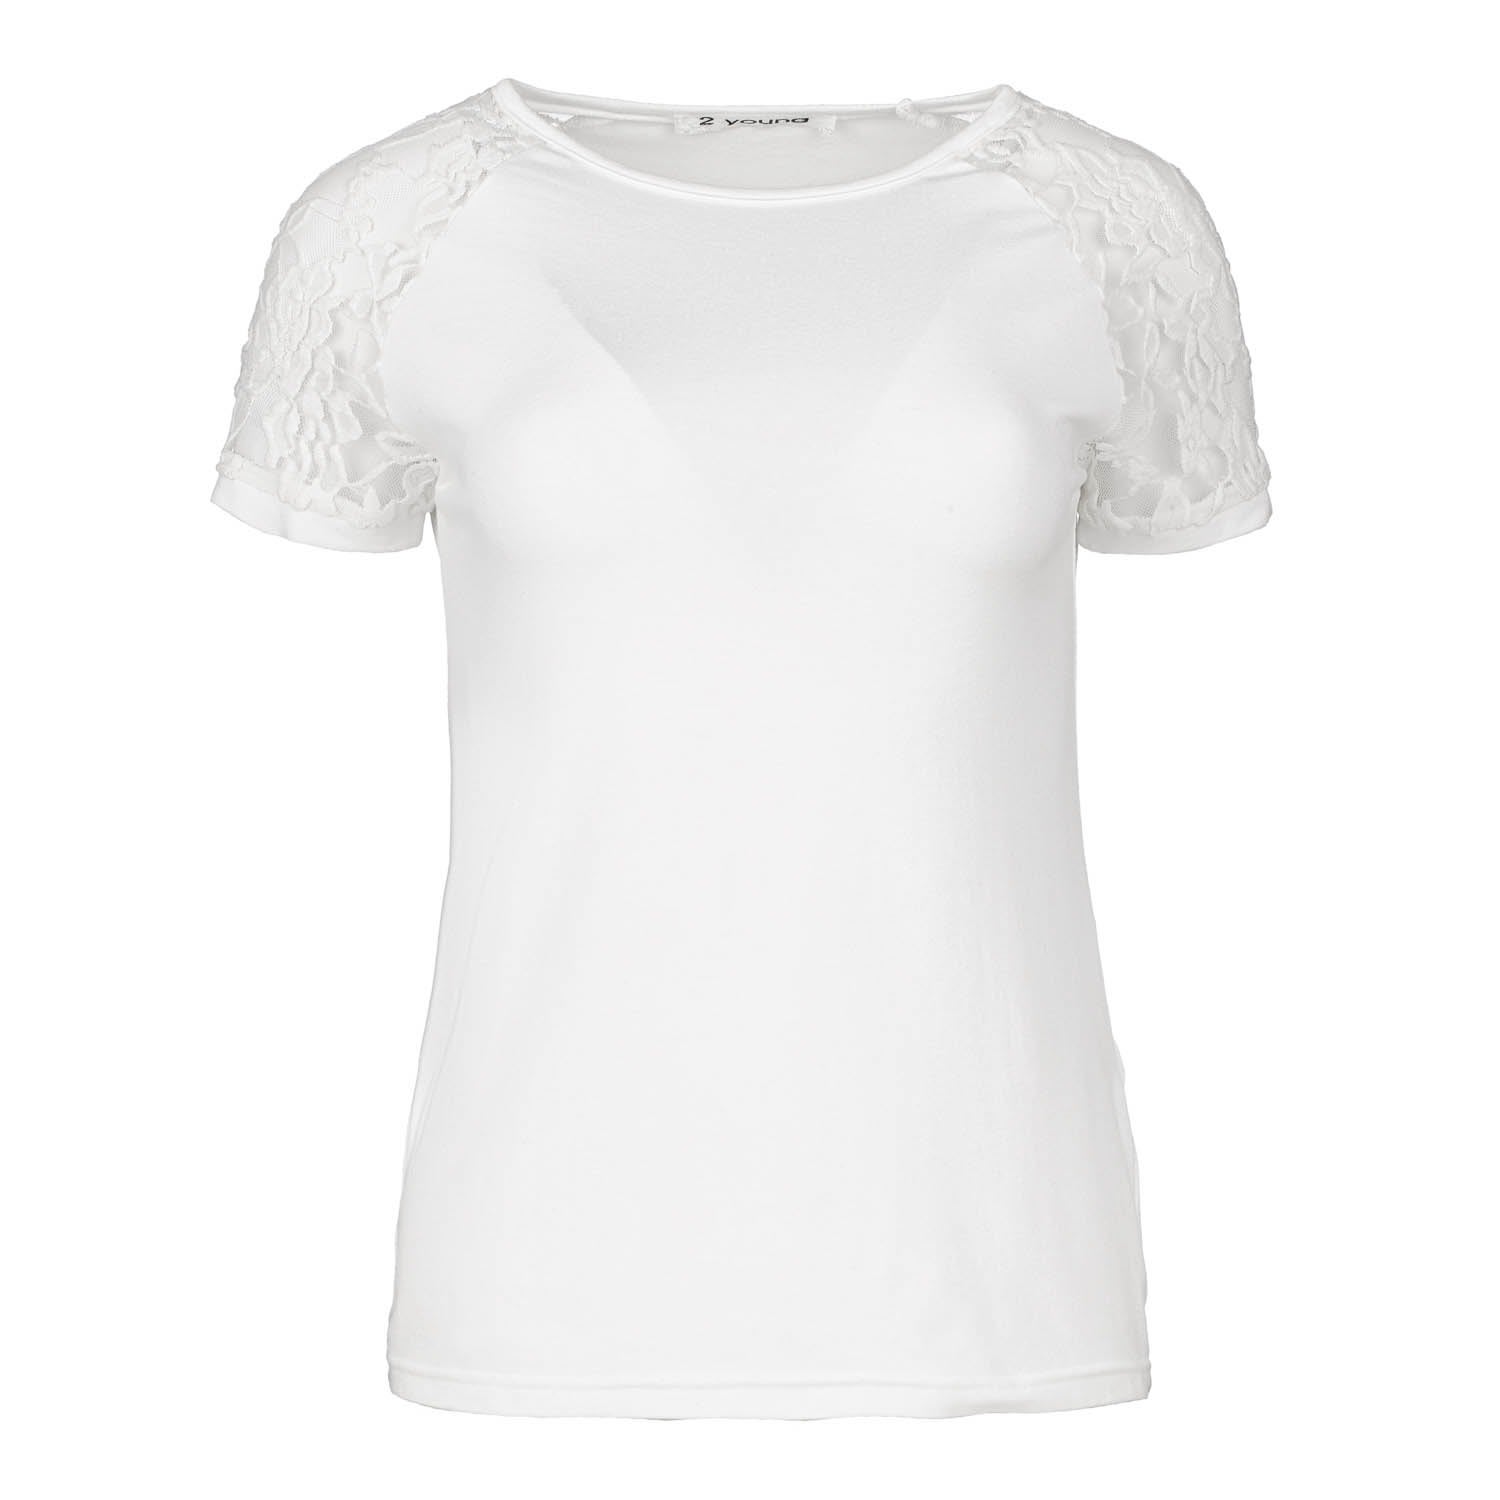 Women's White Ecru Top With Short Lace Sleeves Small Conquista